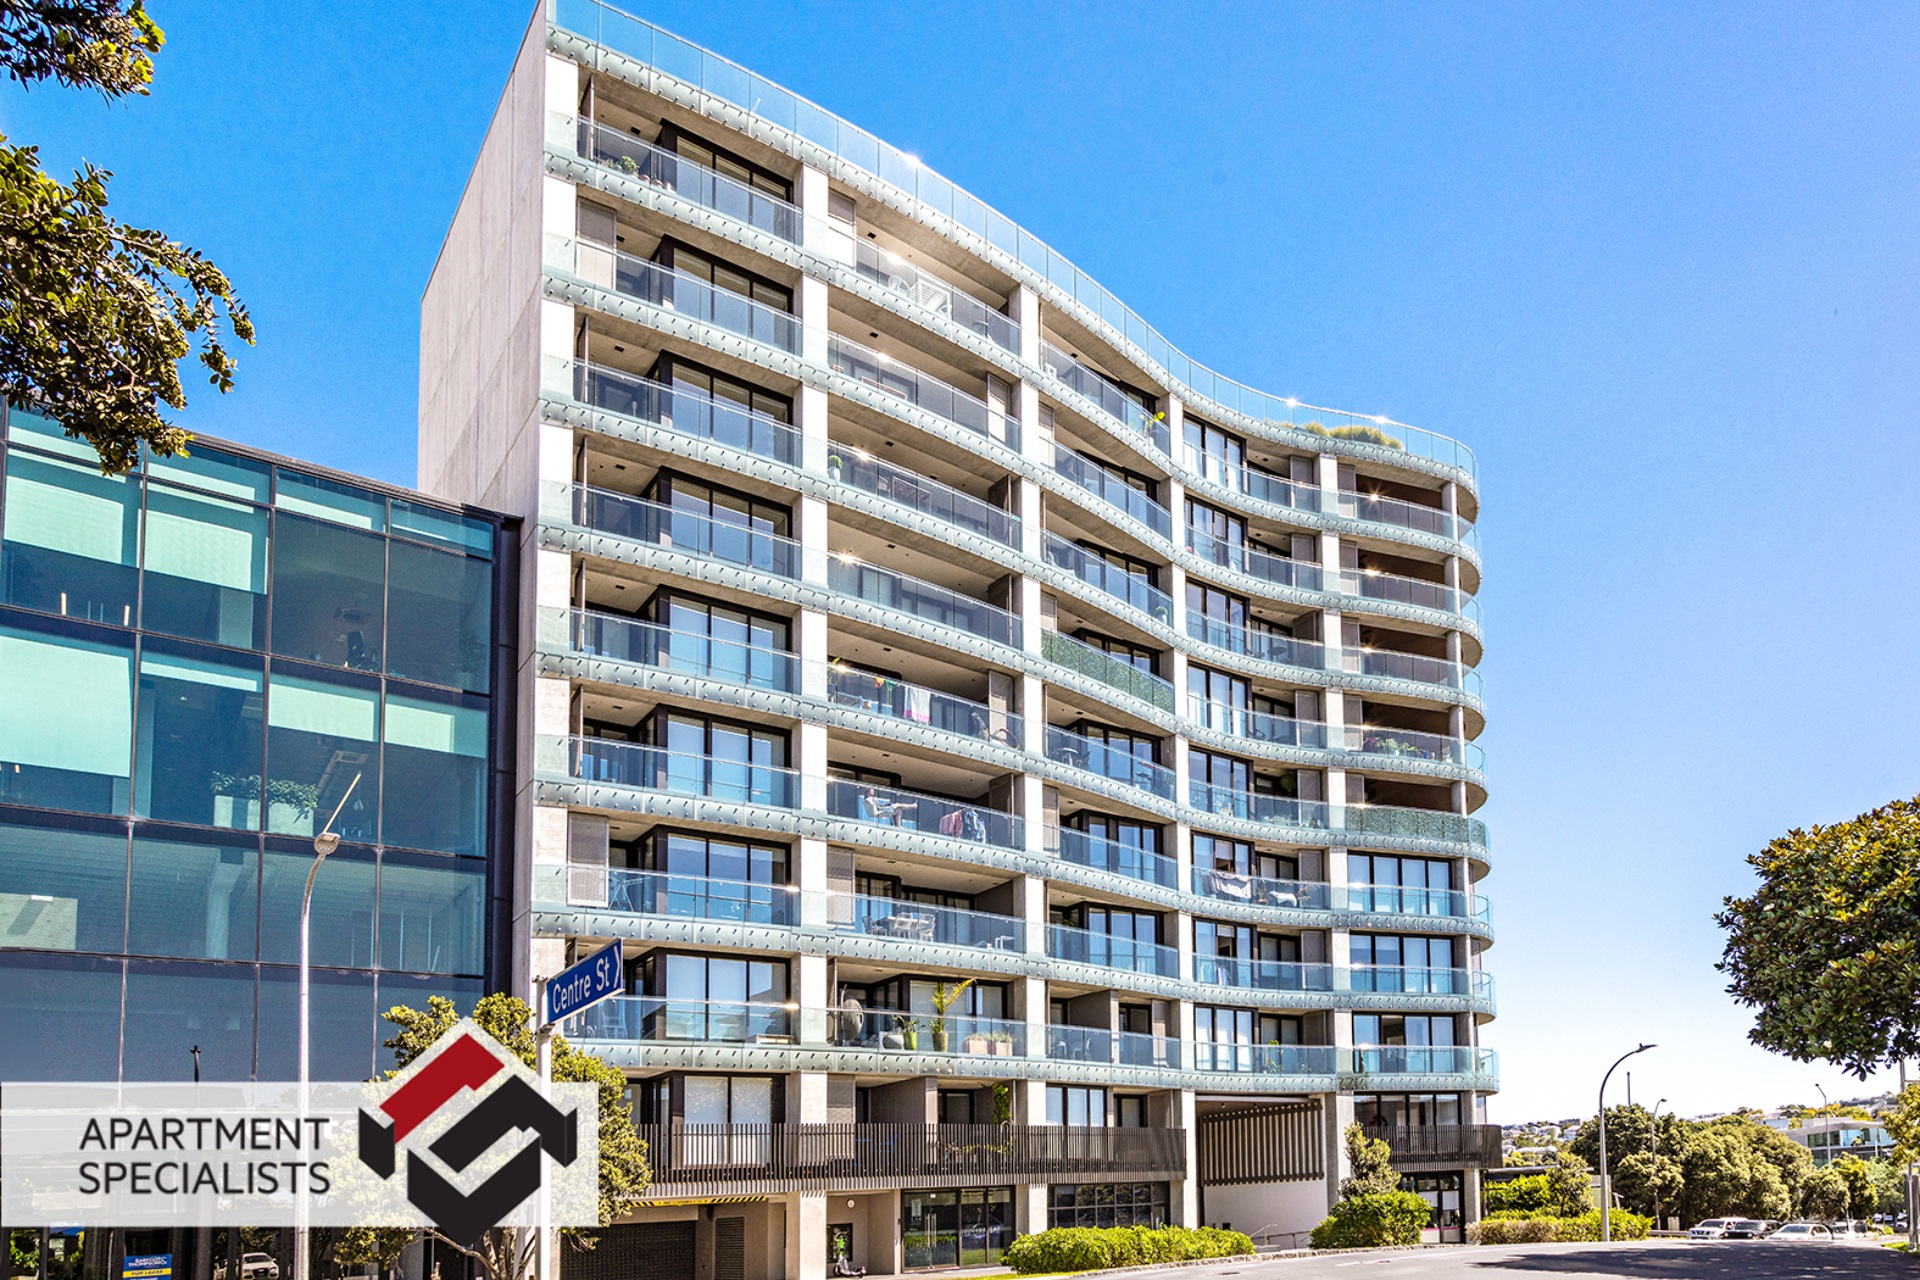 19 | 70 Sale Street, Freemans Bay | Apartment Specialists